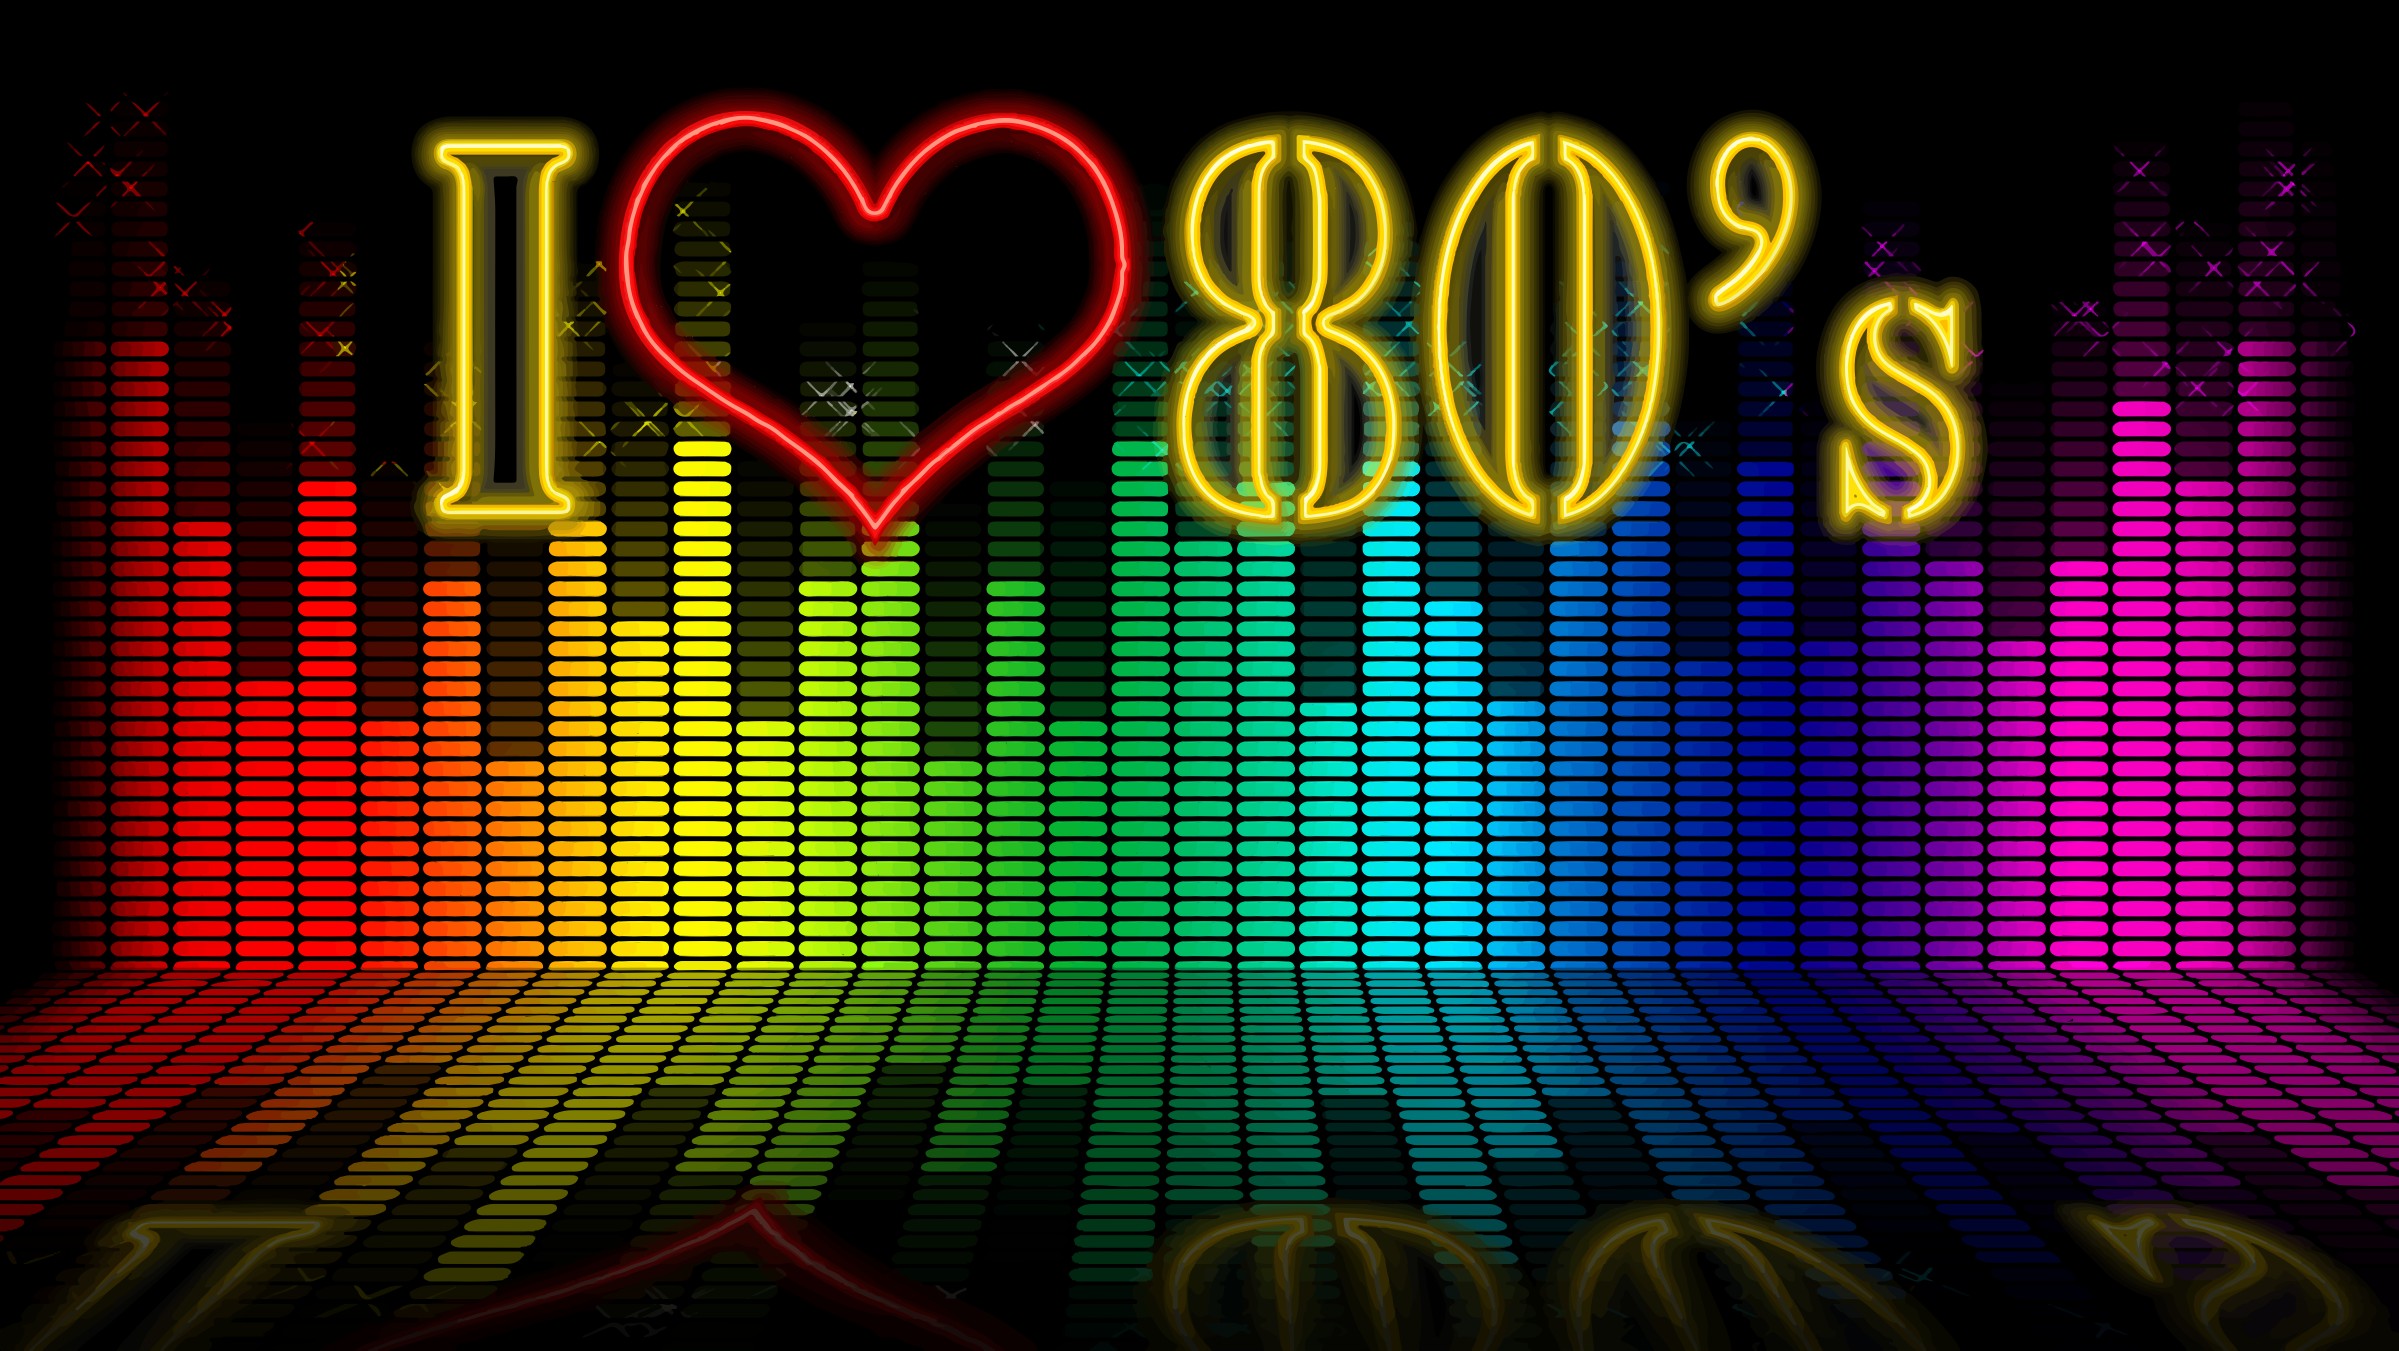 80s-background-download-free-amazing-full-hd-backgrounds-for-desktop-computers-and